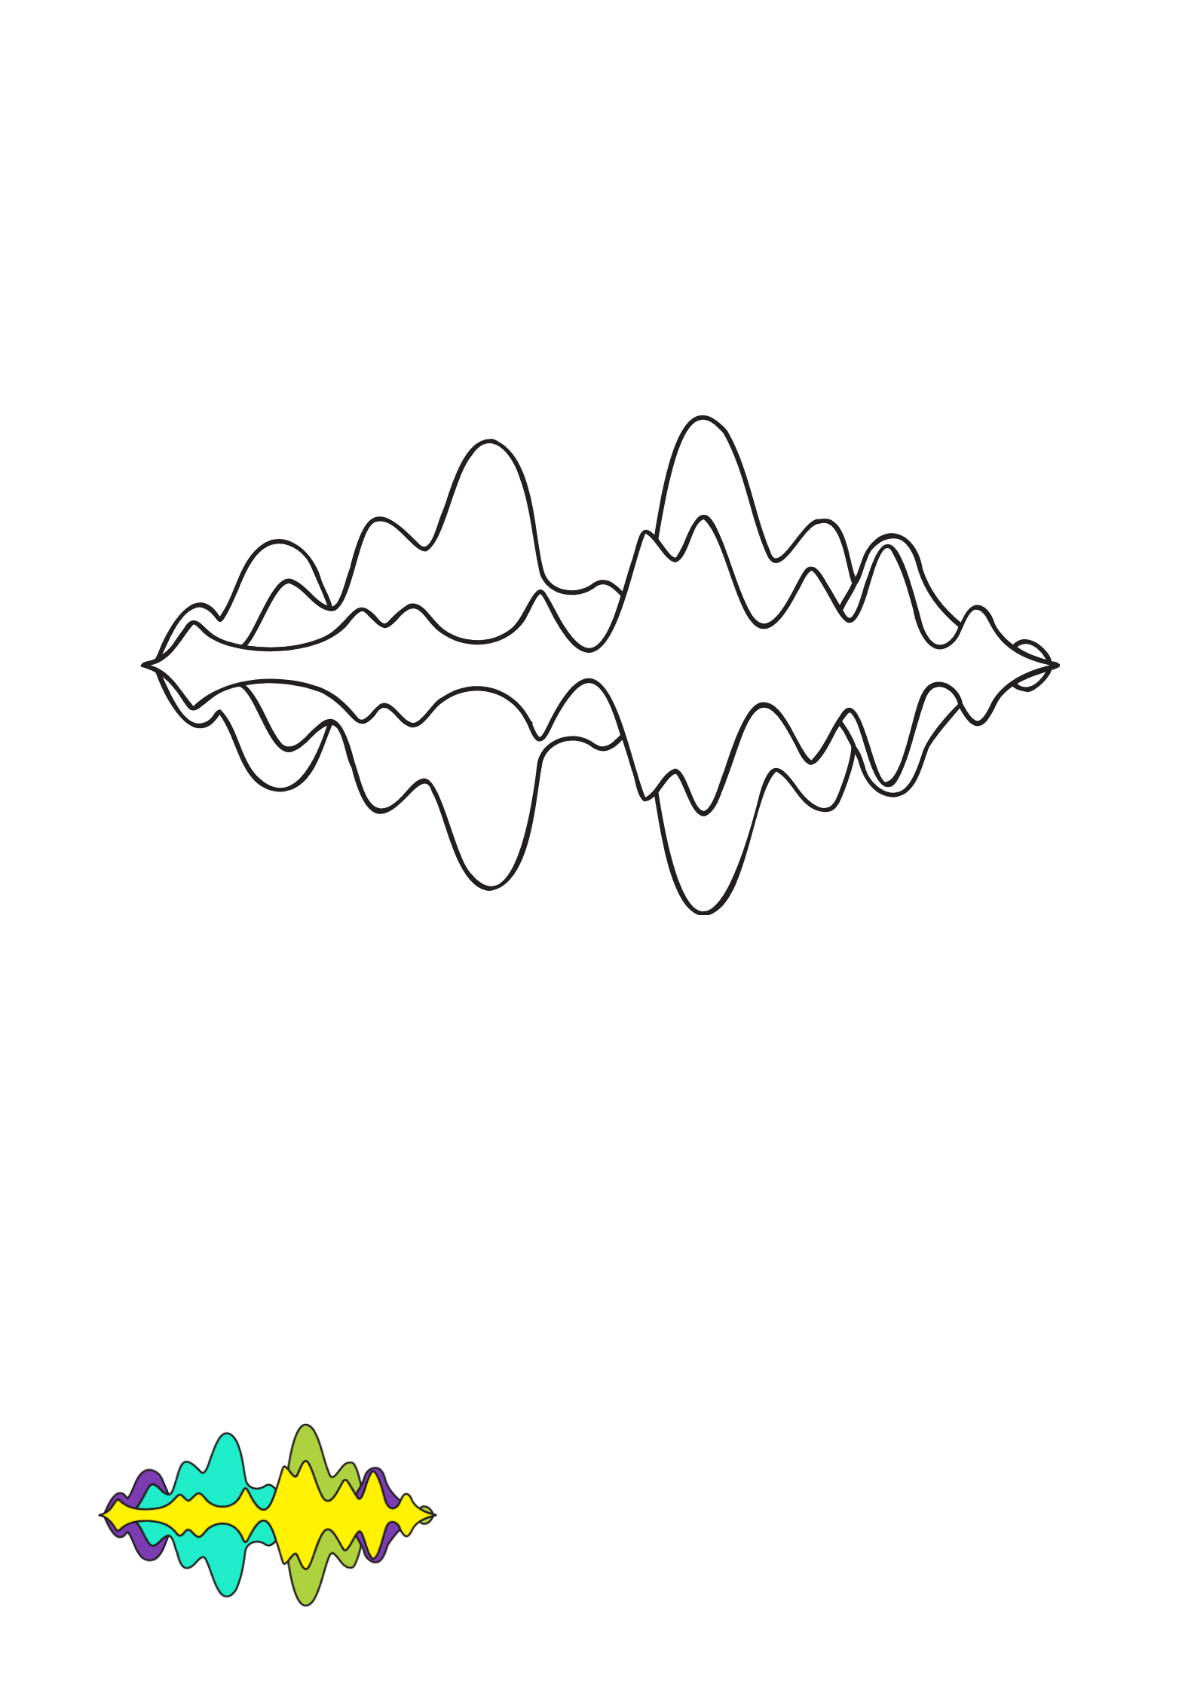 Music Wave Coloring Page Template